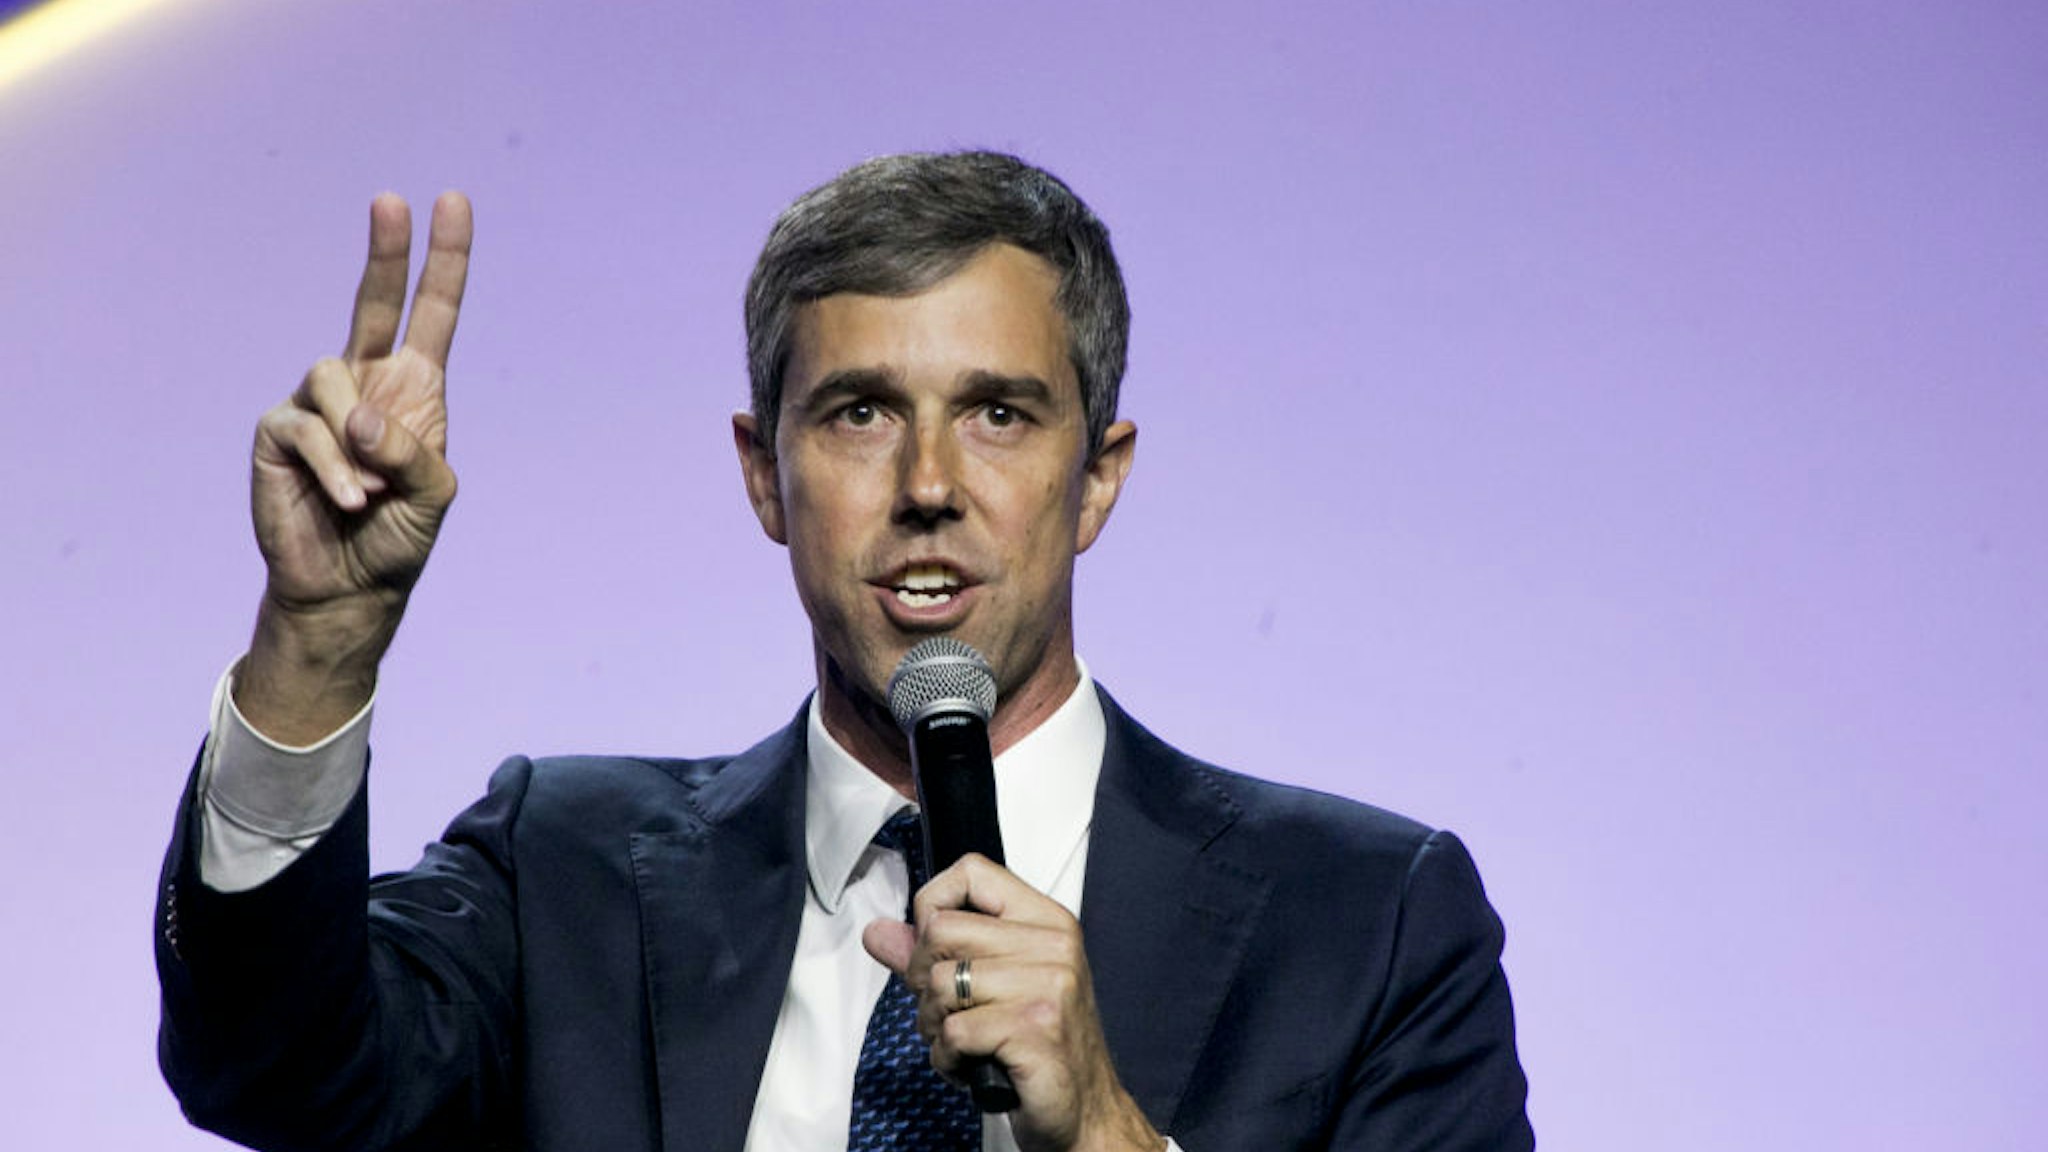 Beto O'Rourke, former Representative from Texas and 2020 Democratic presidential candidate, speaks during a Presidential Candidate Forum at the 110th NAACP Annual Convention in Detroit, Michigan, U.S., on Wednesday, July 24, 2019. The leading Democratic candidates made their case to the NAACP National Convention on Wednesday, as they compete for a voting bloc that accounts for 20% of the party's voters and is crucial to winning the presidential nomination. Photographer: